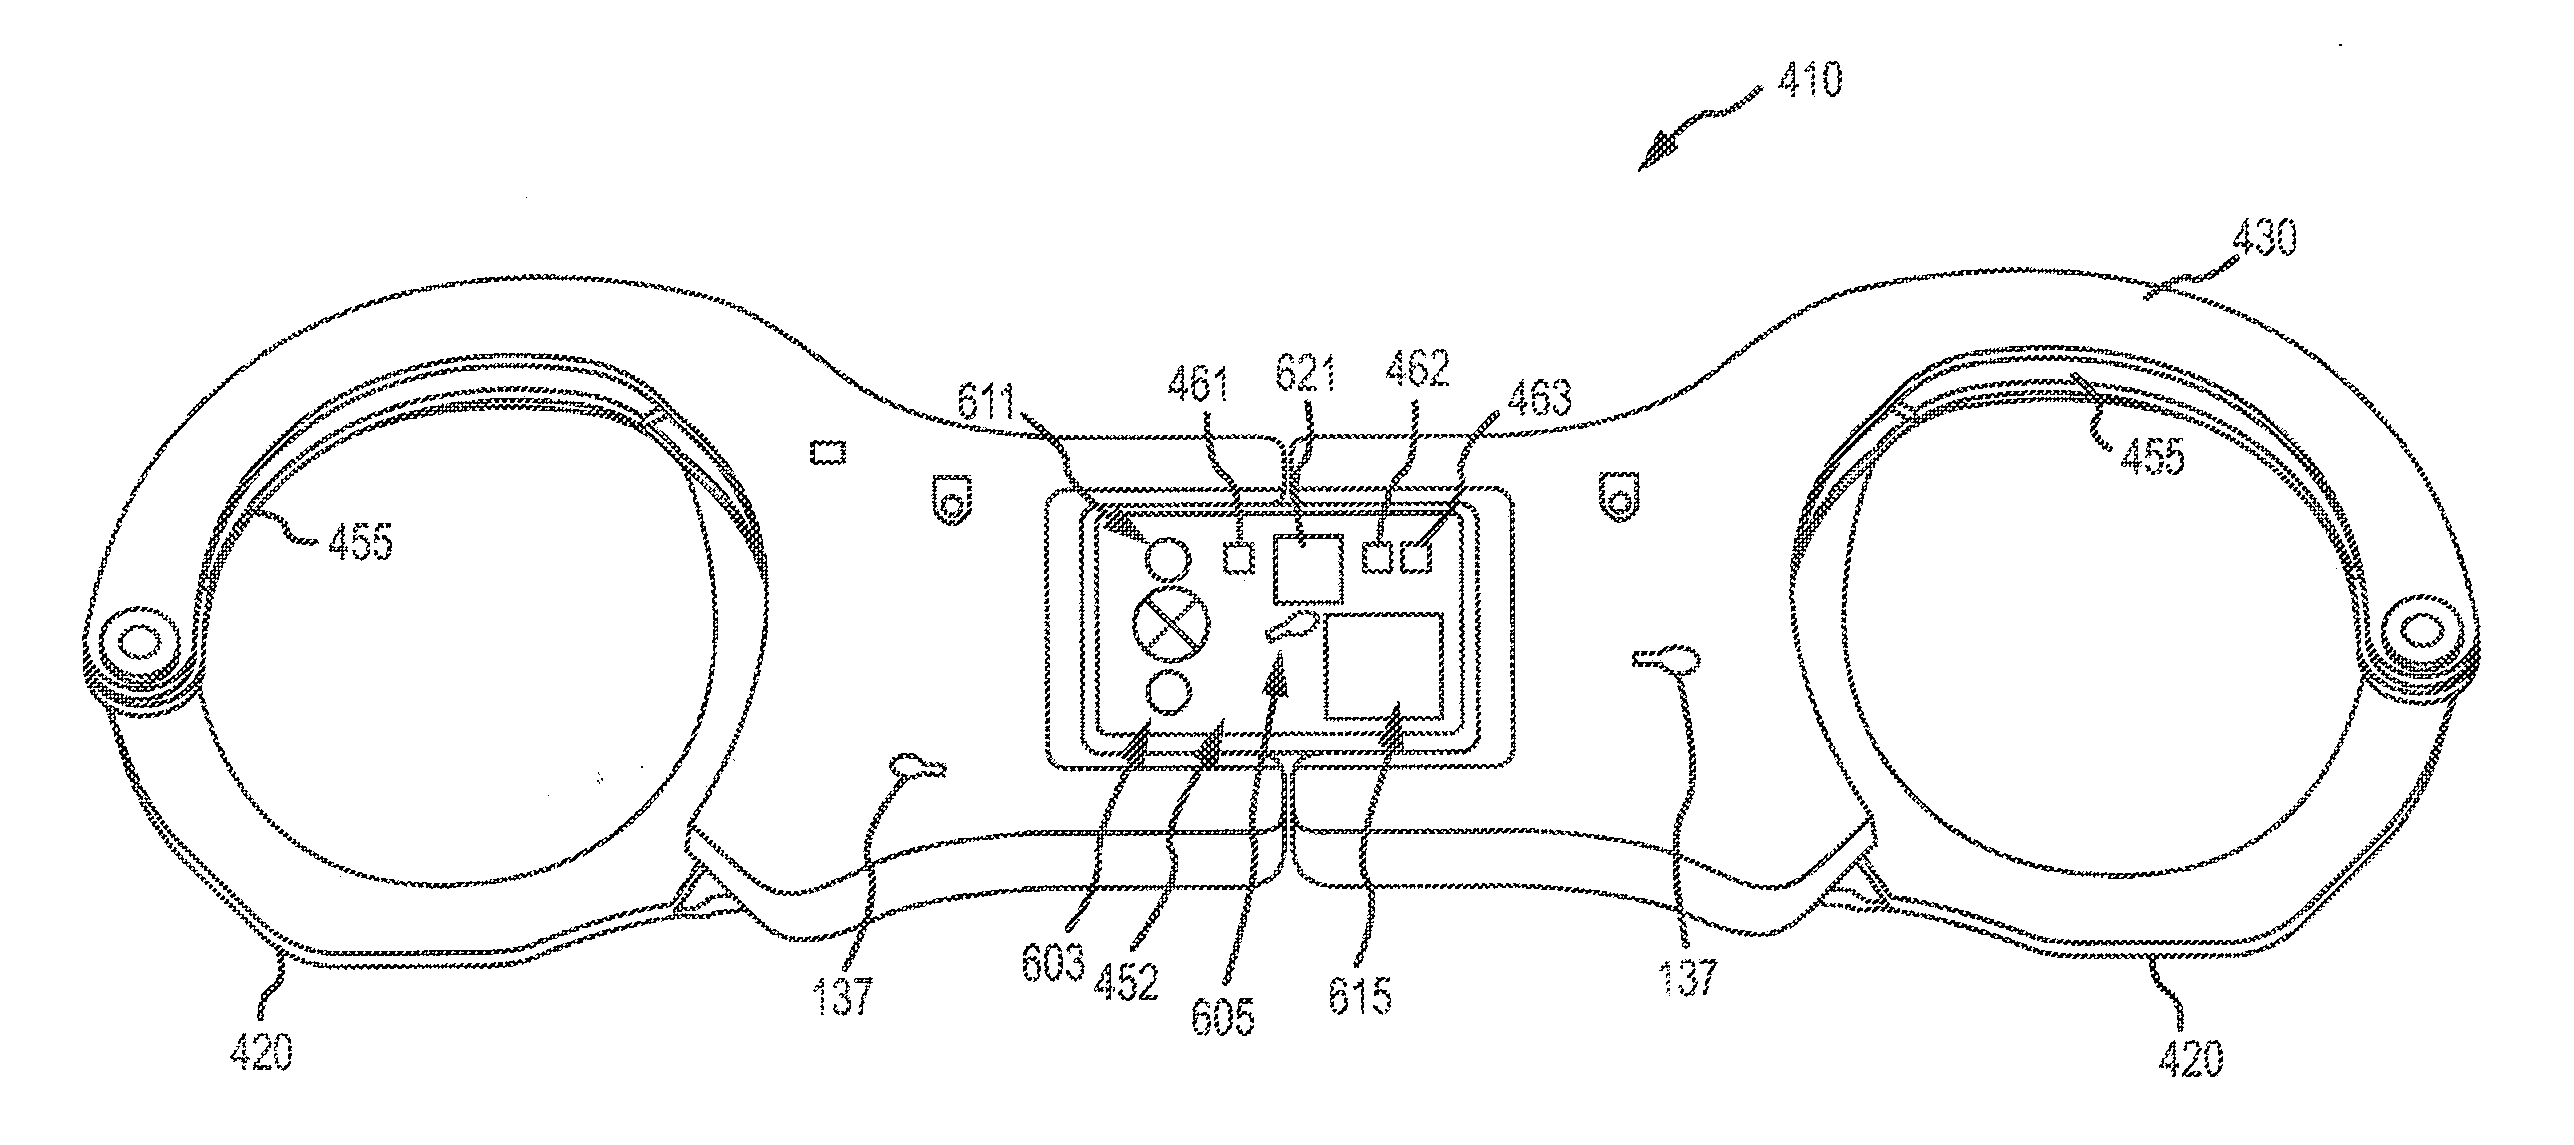 Apparatus and system for augmented detainee restraint